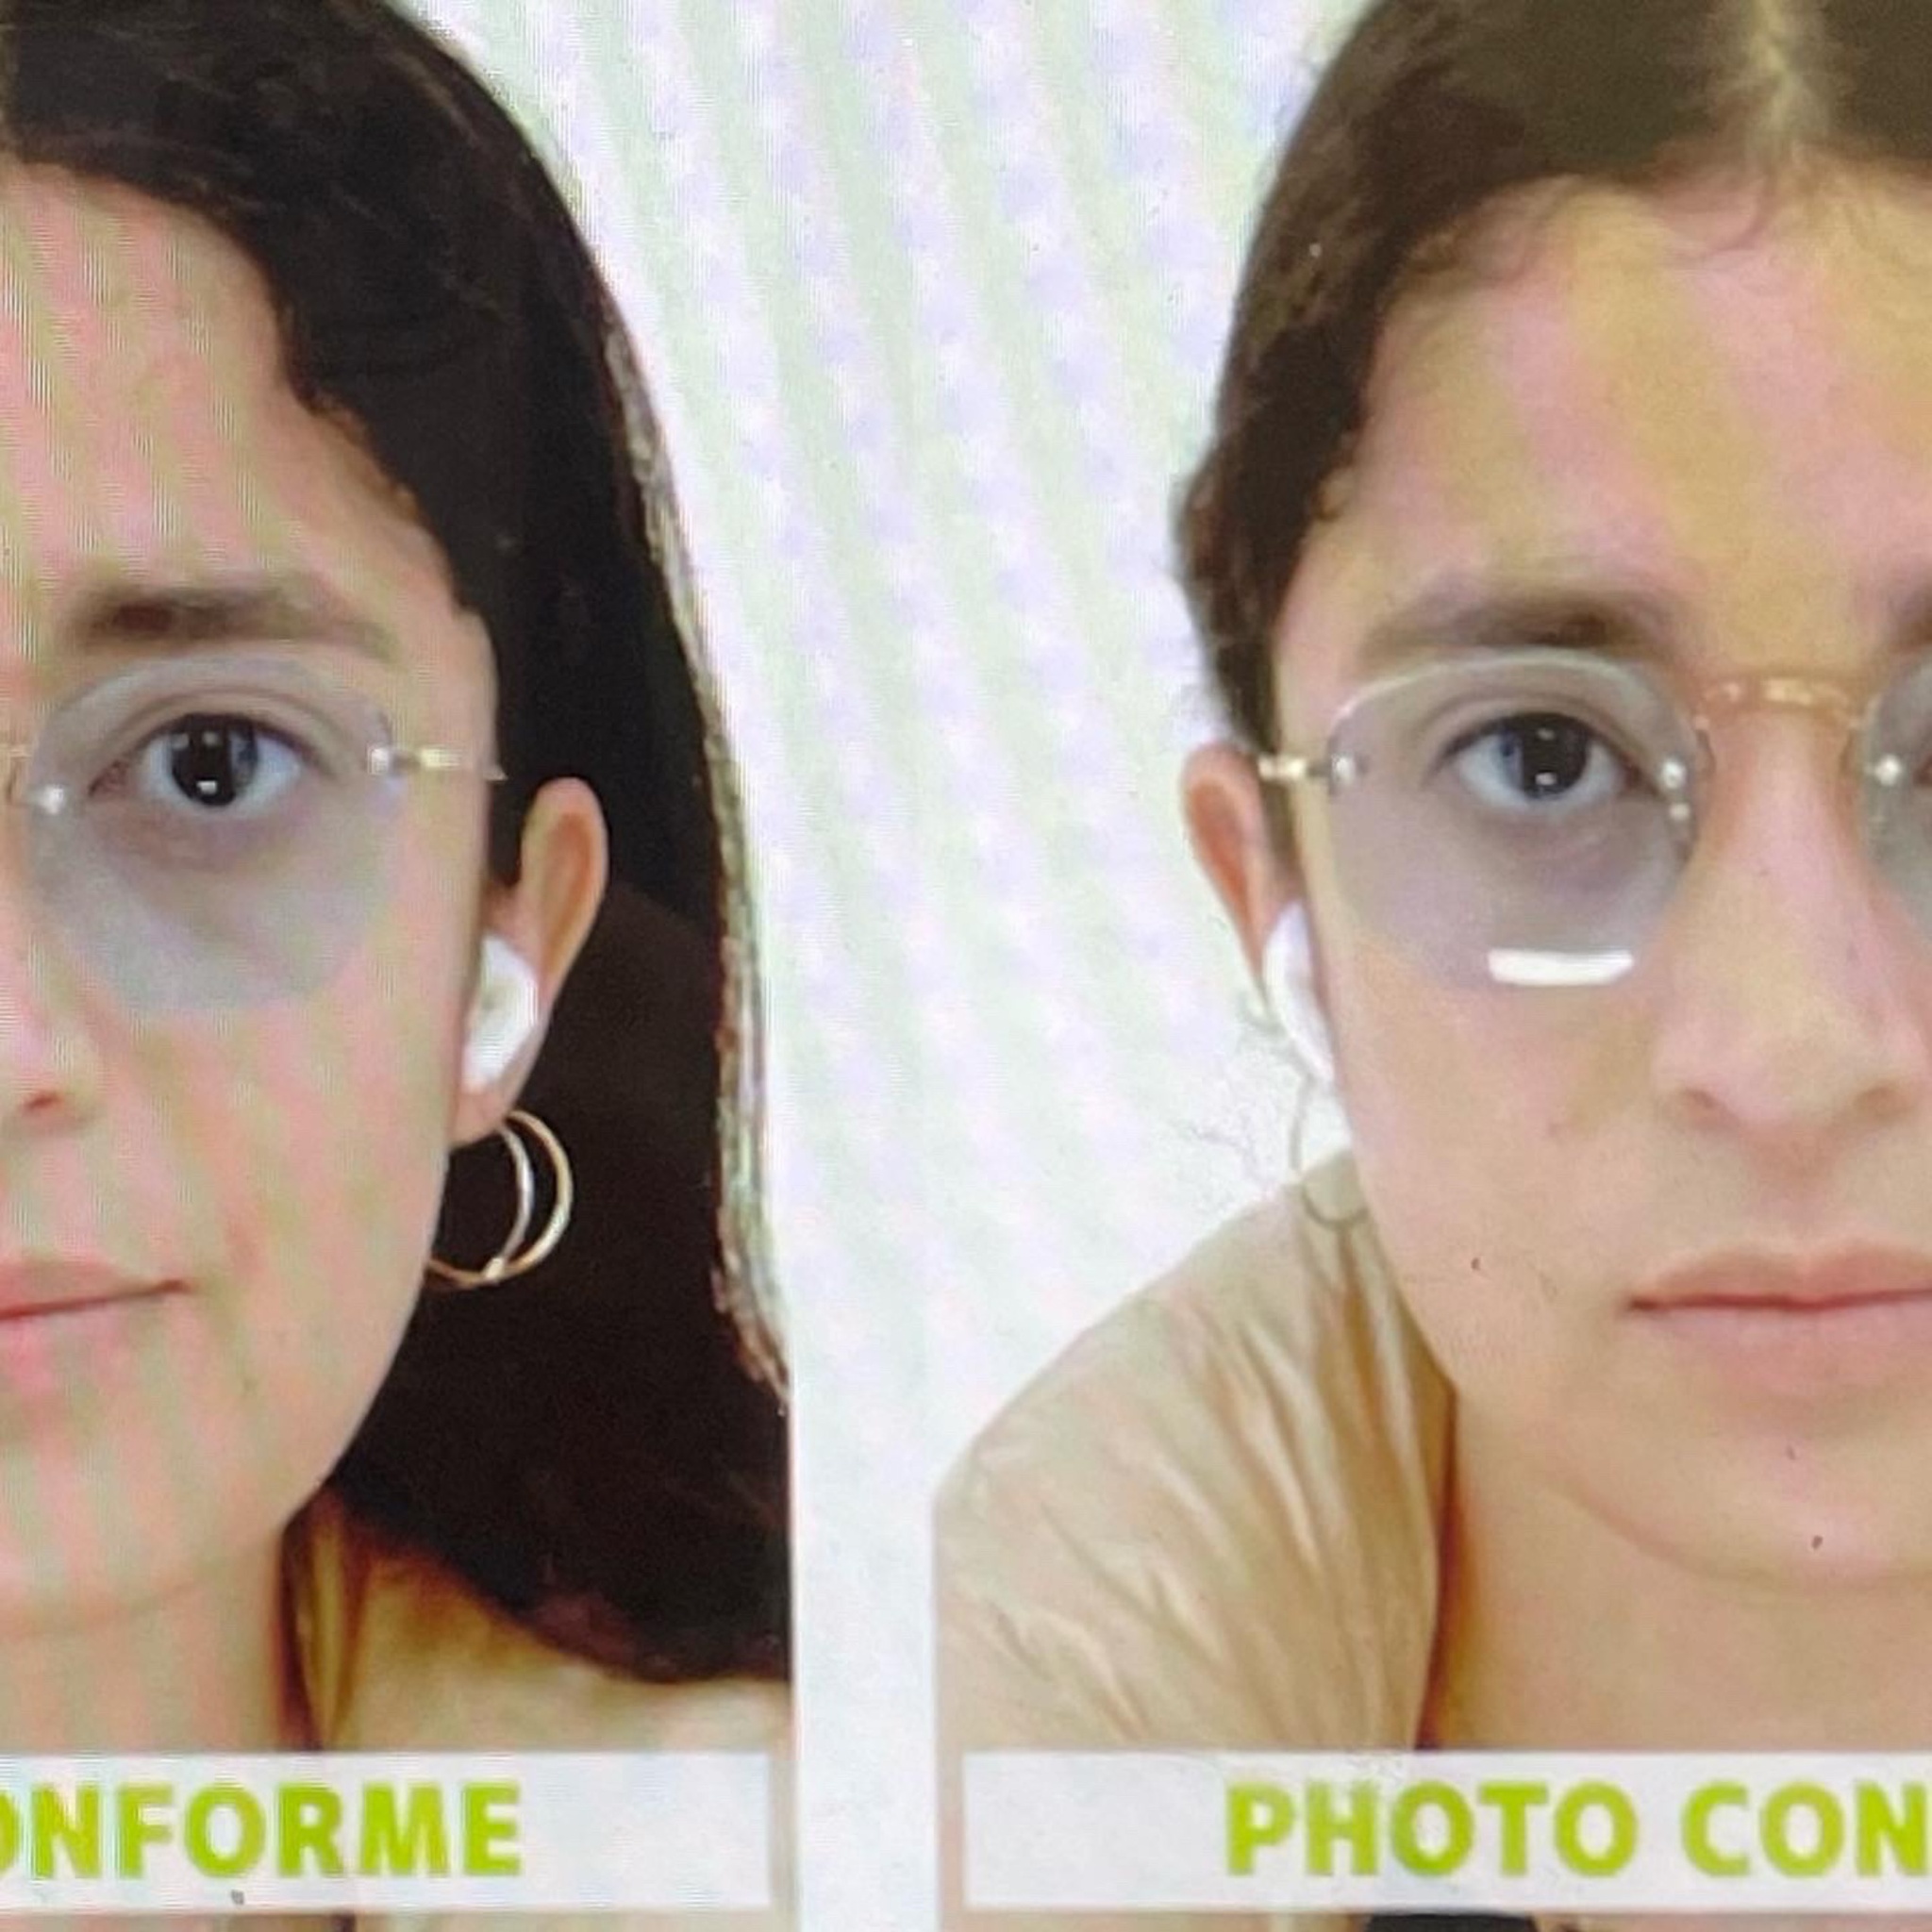 A scan of two ID photos of Gabriela Vidal-Irizarry. The photos are placed side by side so that each shows half of Gabi's face. In the left hand image, she wears glasses with her hair down. In the right hand image, she wears glasses with her hair pulled back. At the bottom of either image are printed the words in French Photo Conforme.